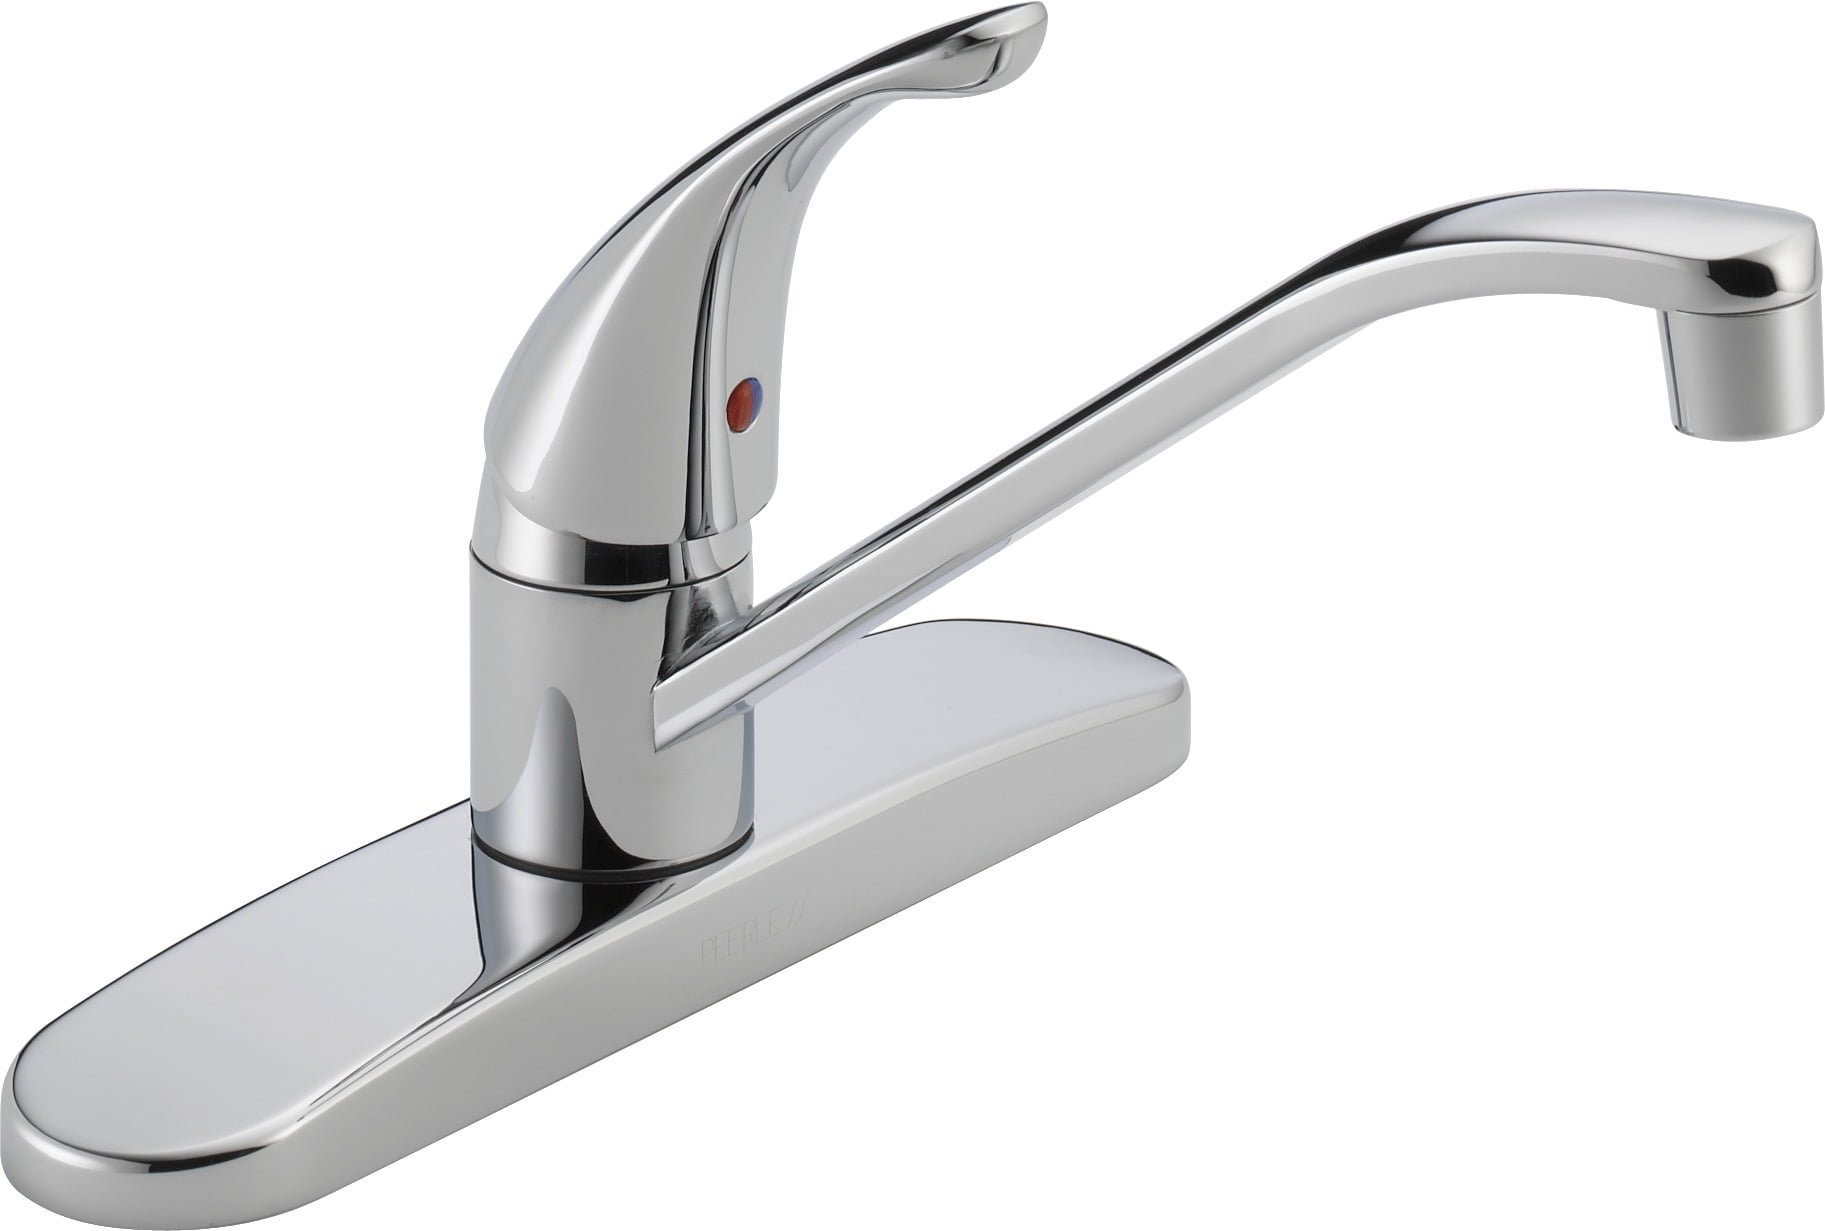 Peerless Core Single Handle Kitchen Faucet In Chrome P110lf W